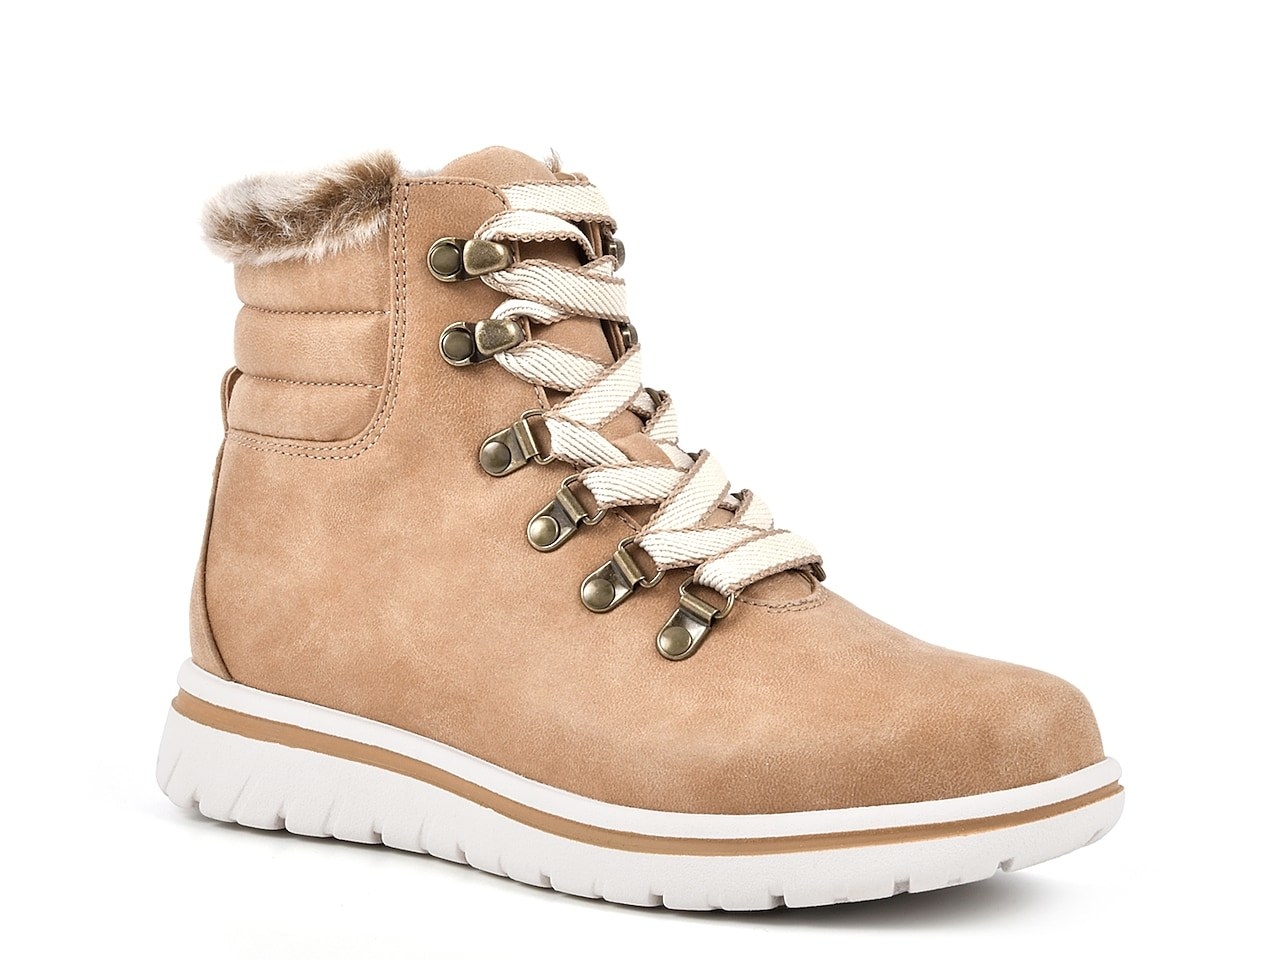 Womens Ankle Boots Warm Winter Work High Top Desert Lace Up Shoes 